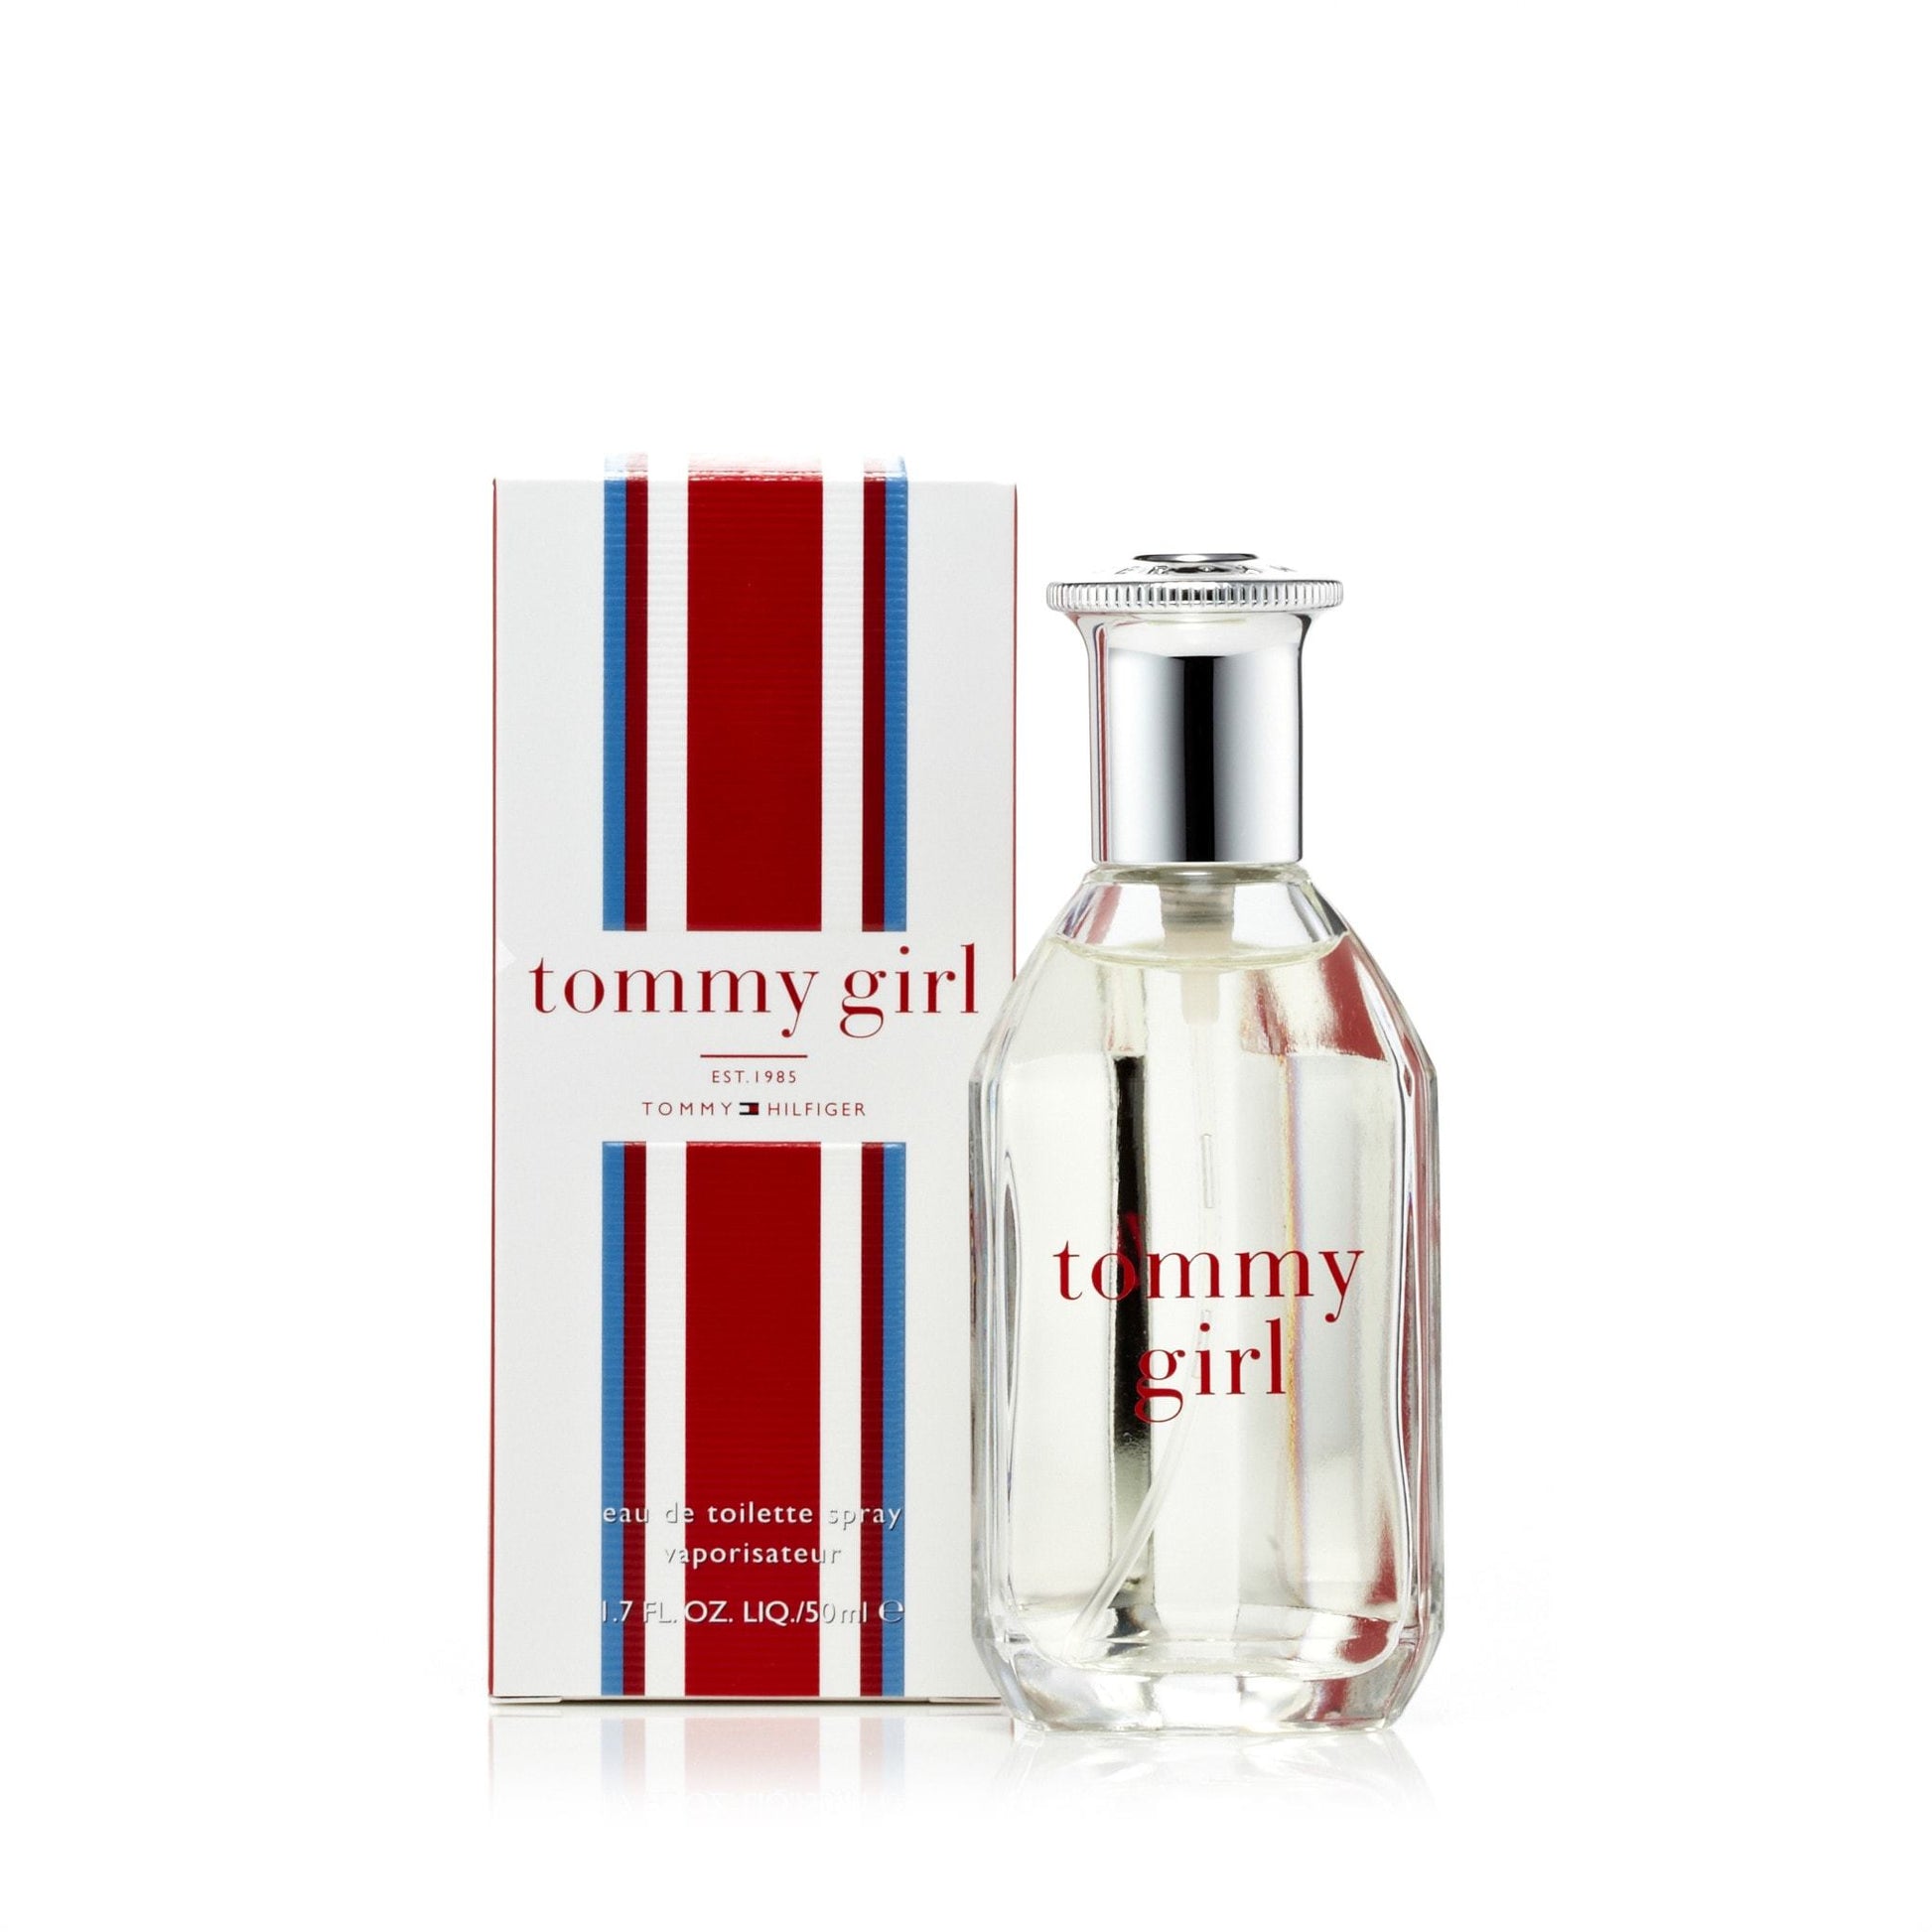 Tommy Girl Eau de Toilette Spray for Women by Tommy Hilfiger, Product image 5